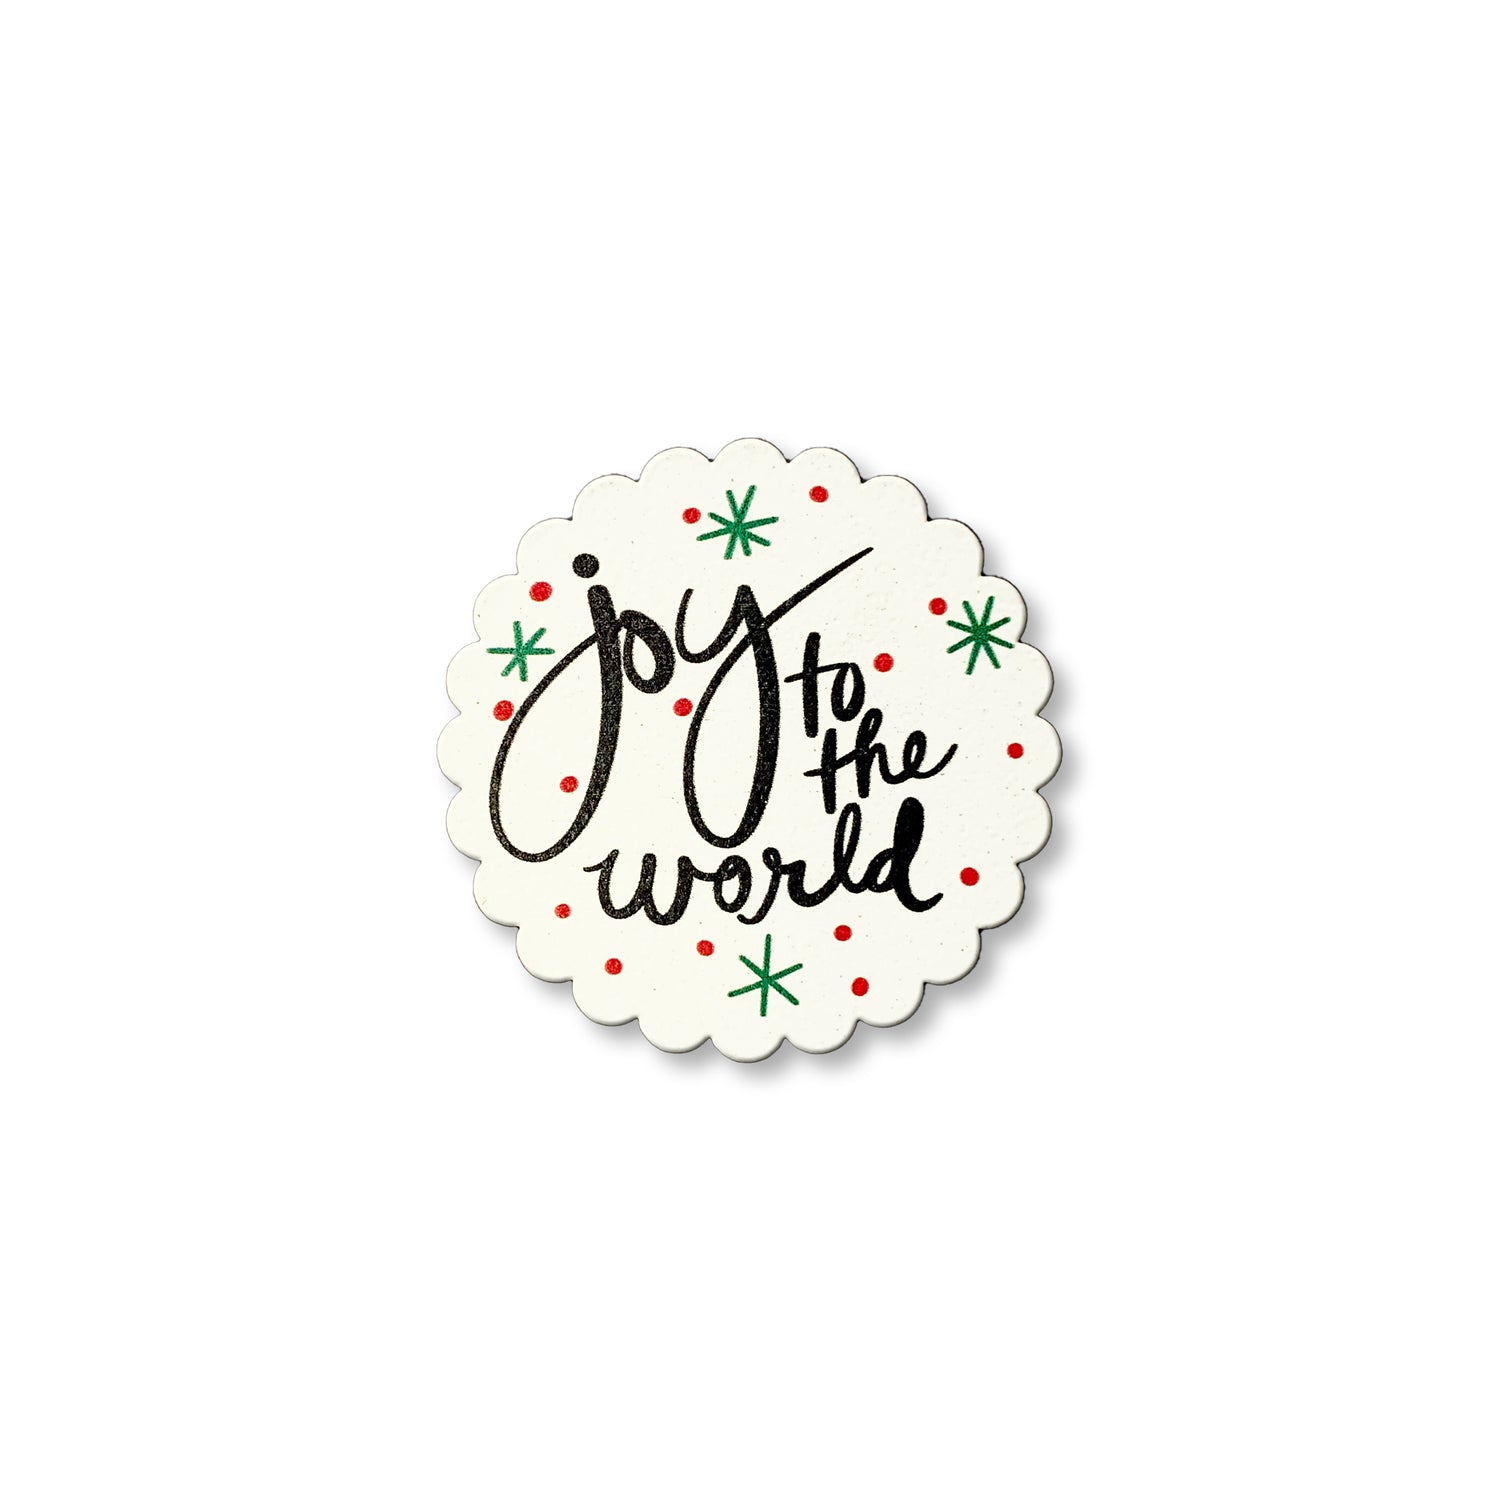 Joy to the World Magnet